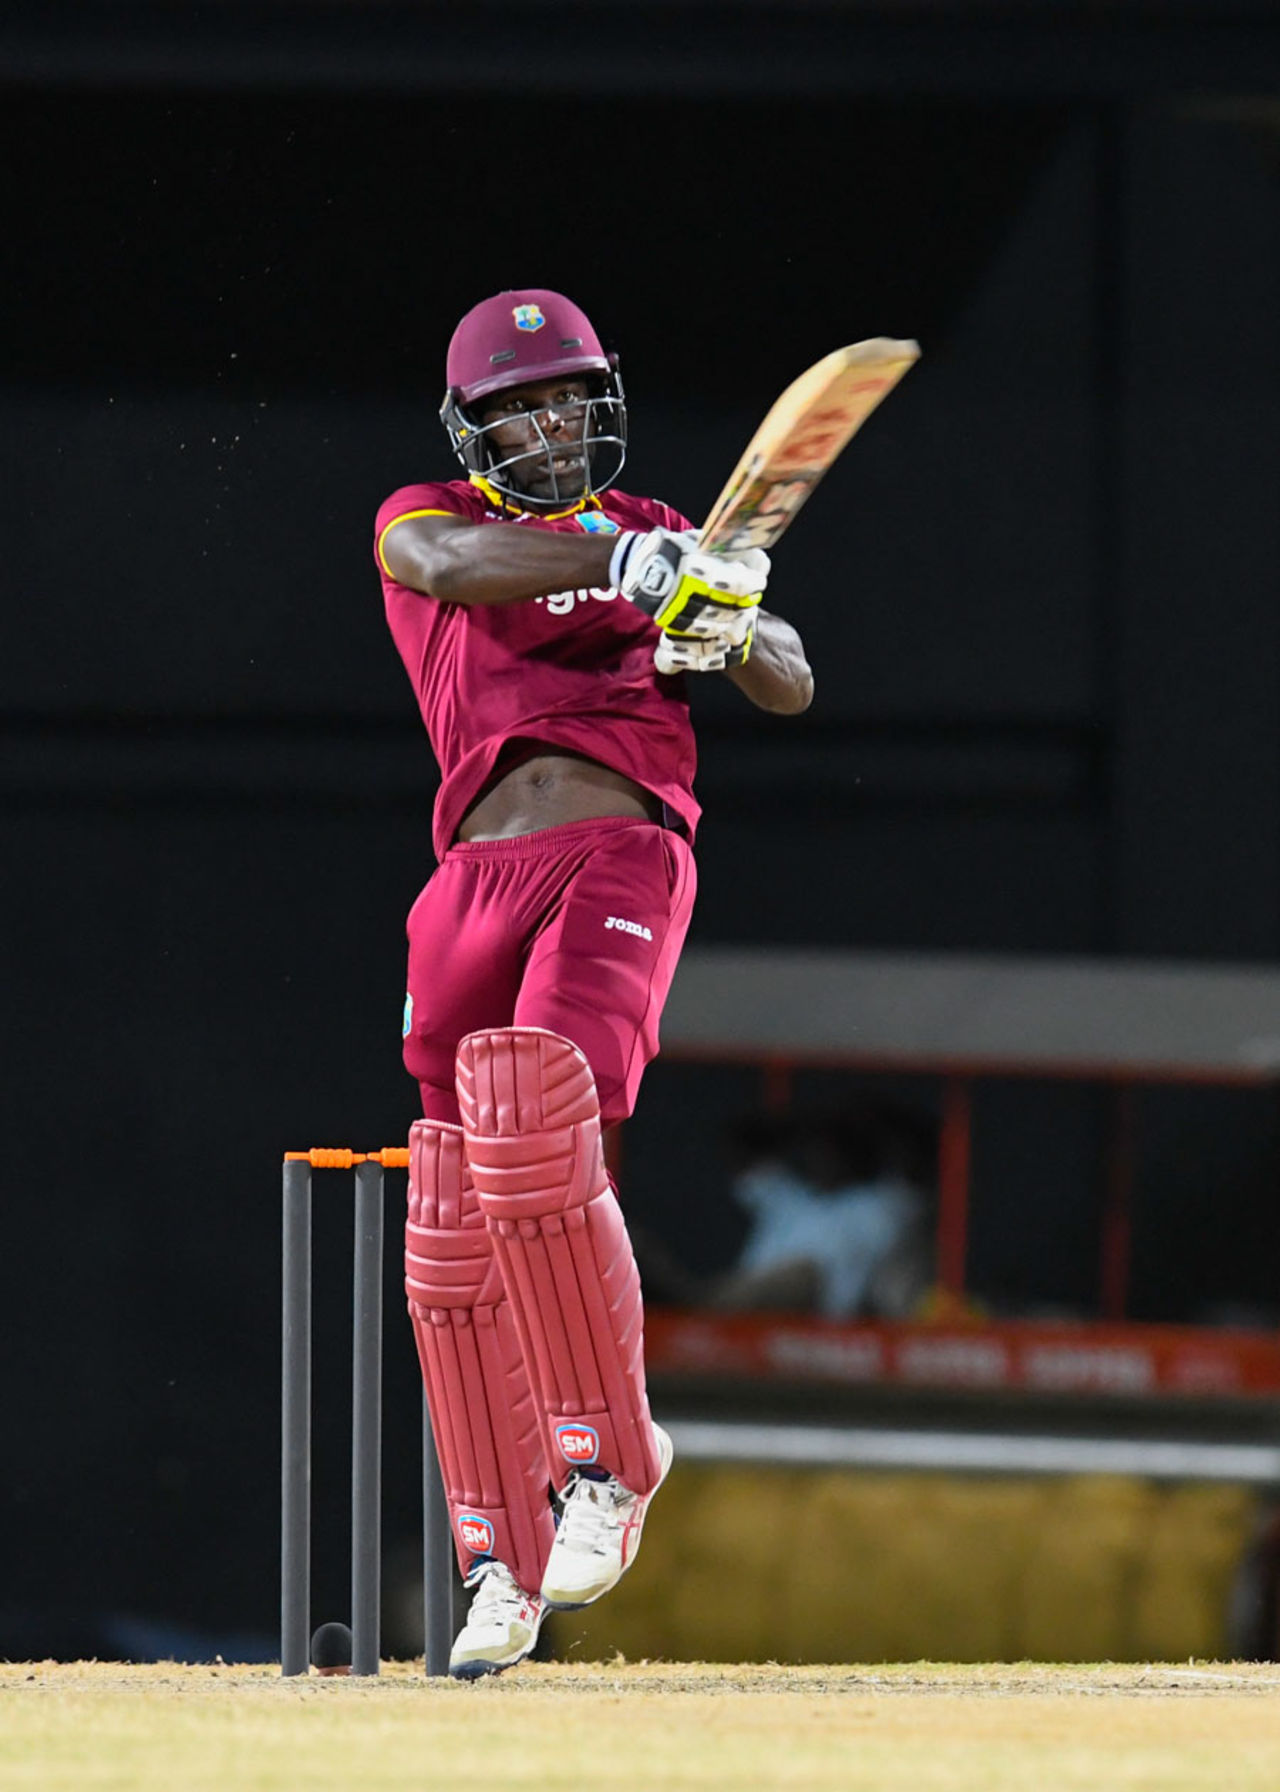 Chadwick Walton gets behind a short ball to whip it past mid-on, West Indies v Afghanistan, 2nd T20I, St Kitts, June 3, 2017